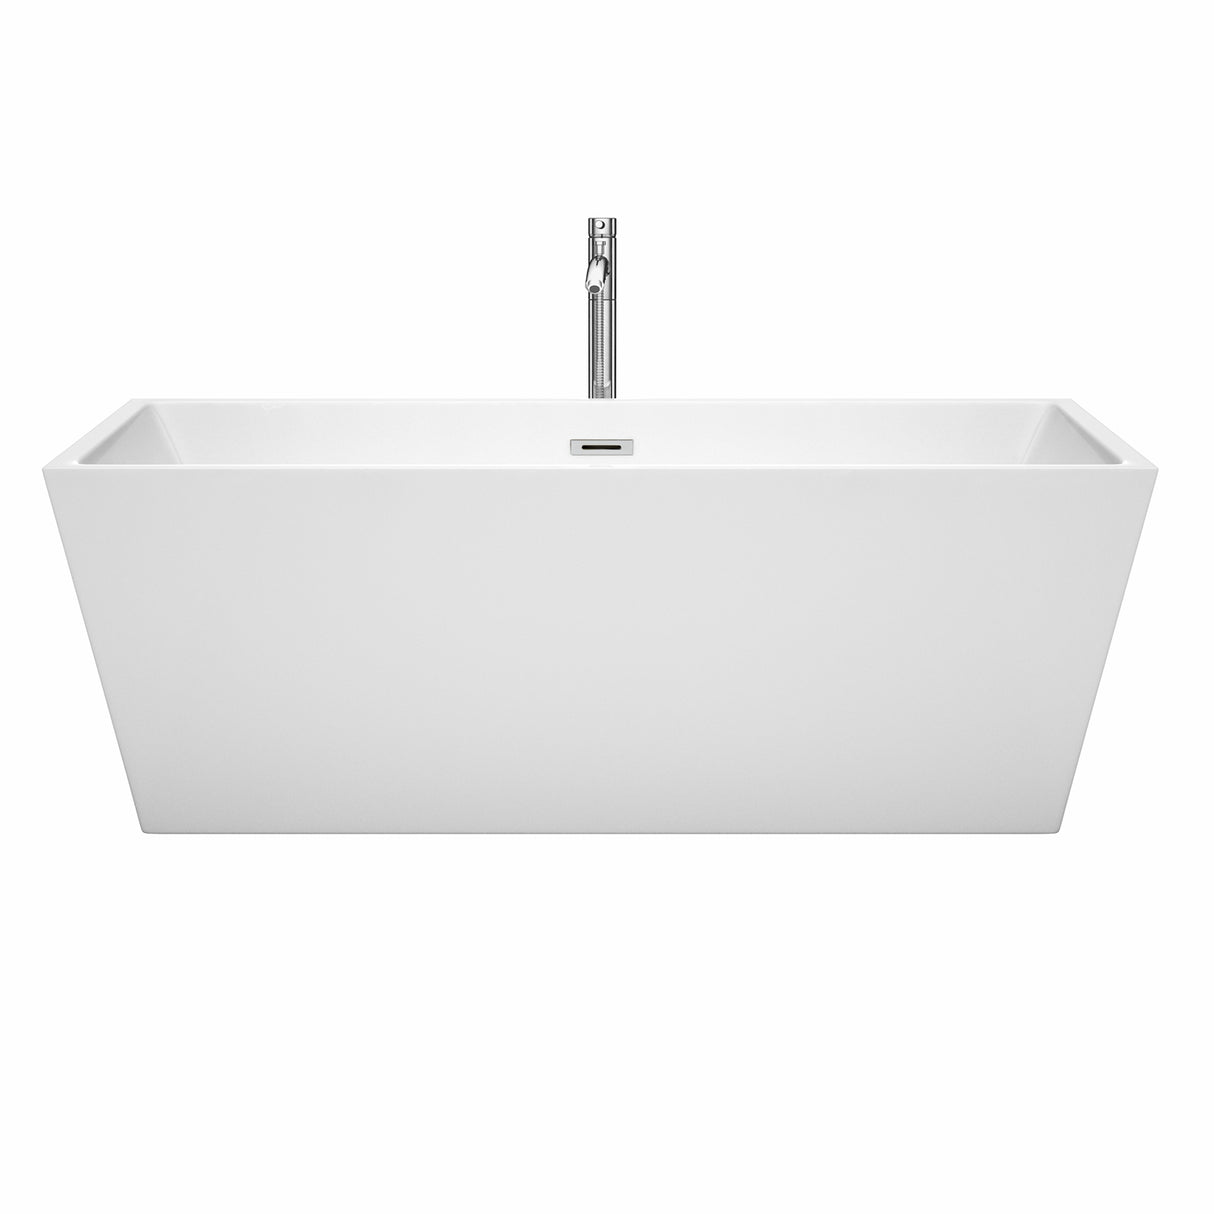 Sara 67 Inch Freestanding Bathtub in White with Floor Mounted Faucet Drain and Overflow Trim in Polished Chrome